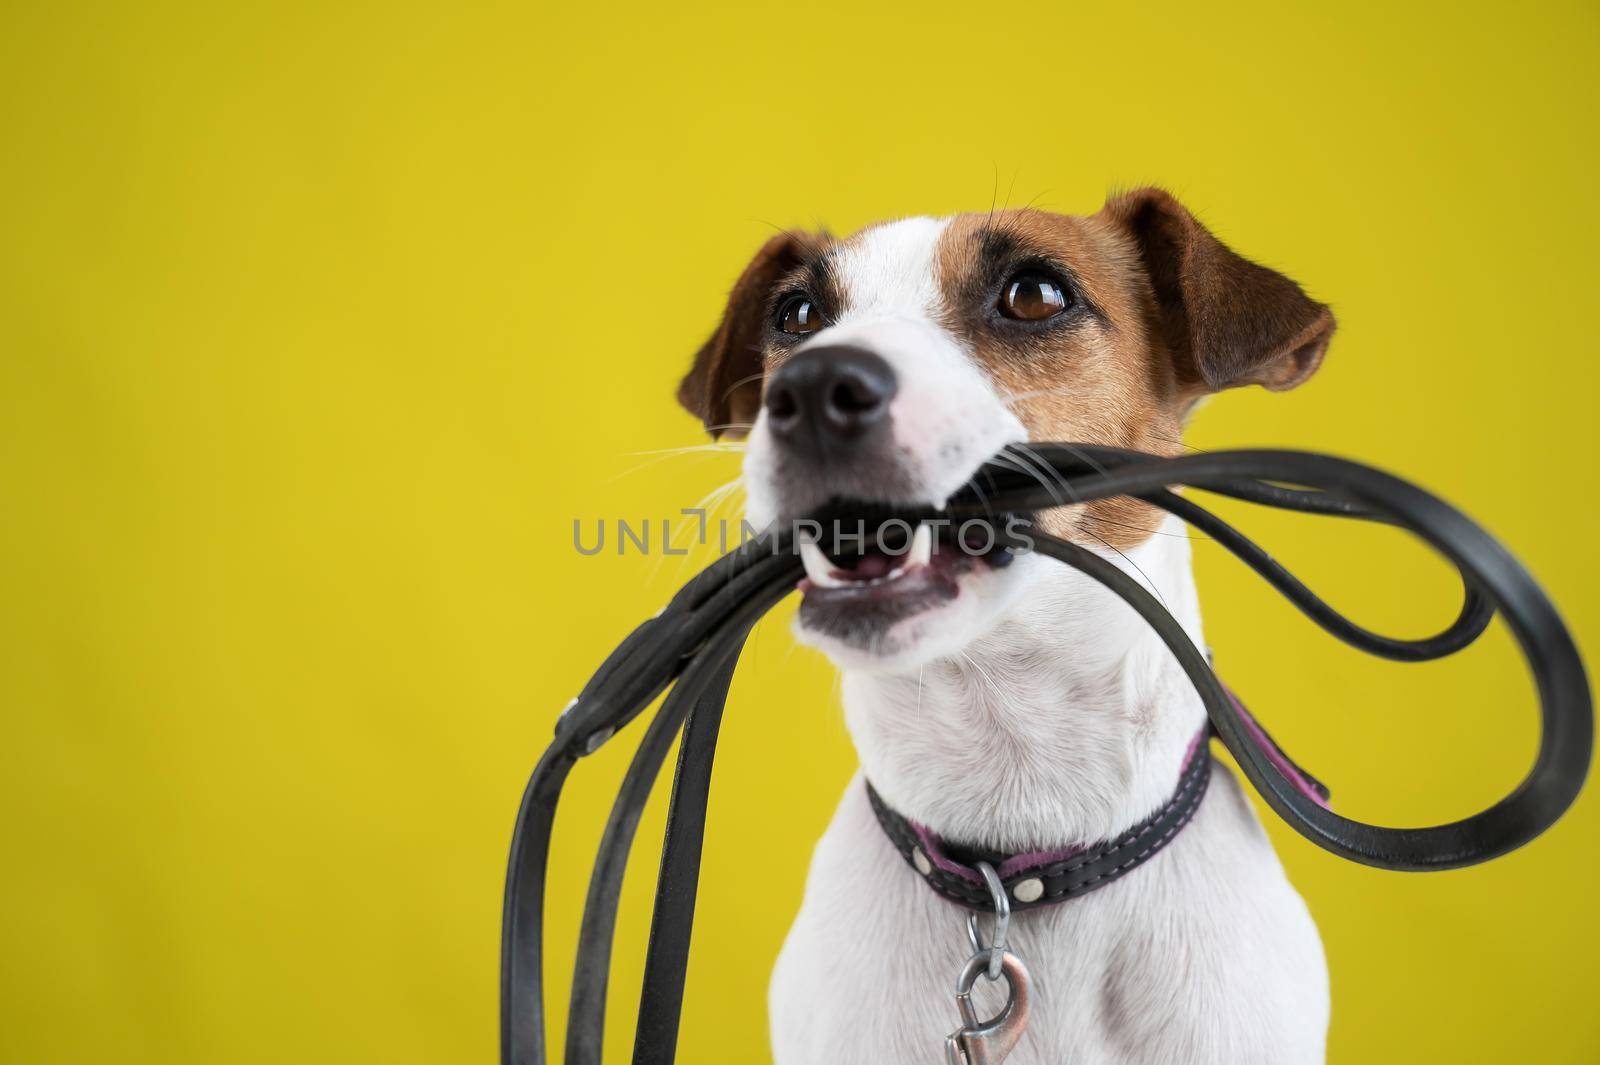 The dog is holding a leash on a yellow background. Jack Russell Terrier calls the owner for a walk